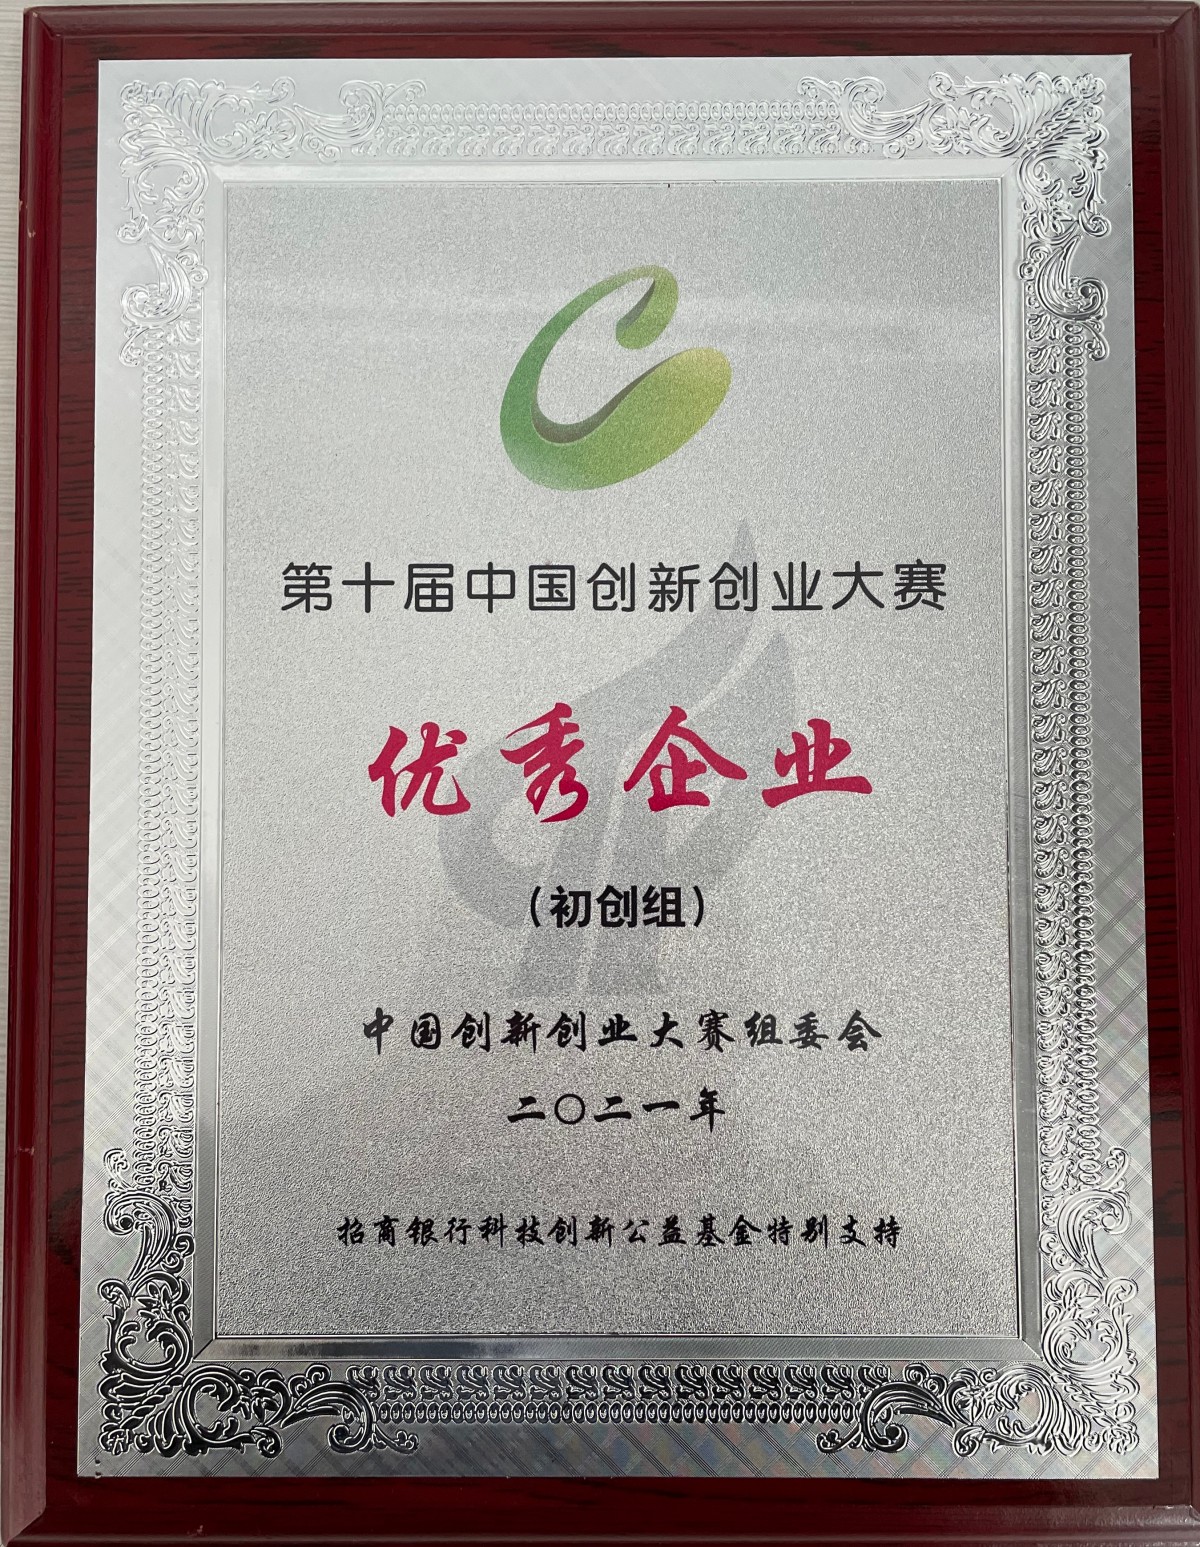 Outstanding Enterprises in the 10th China Innovation and Entrepreneurship Competition